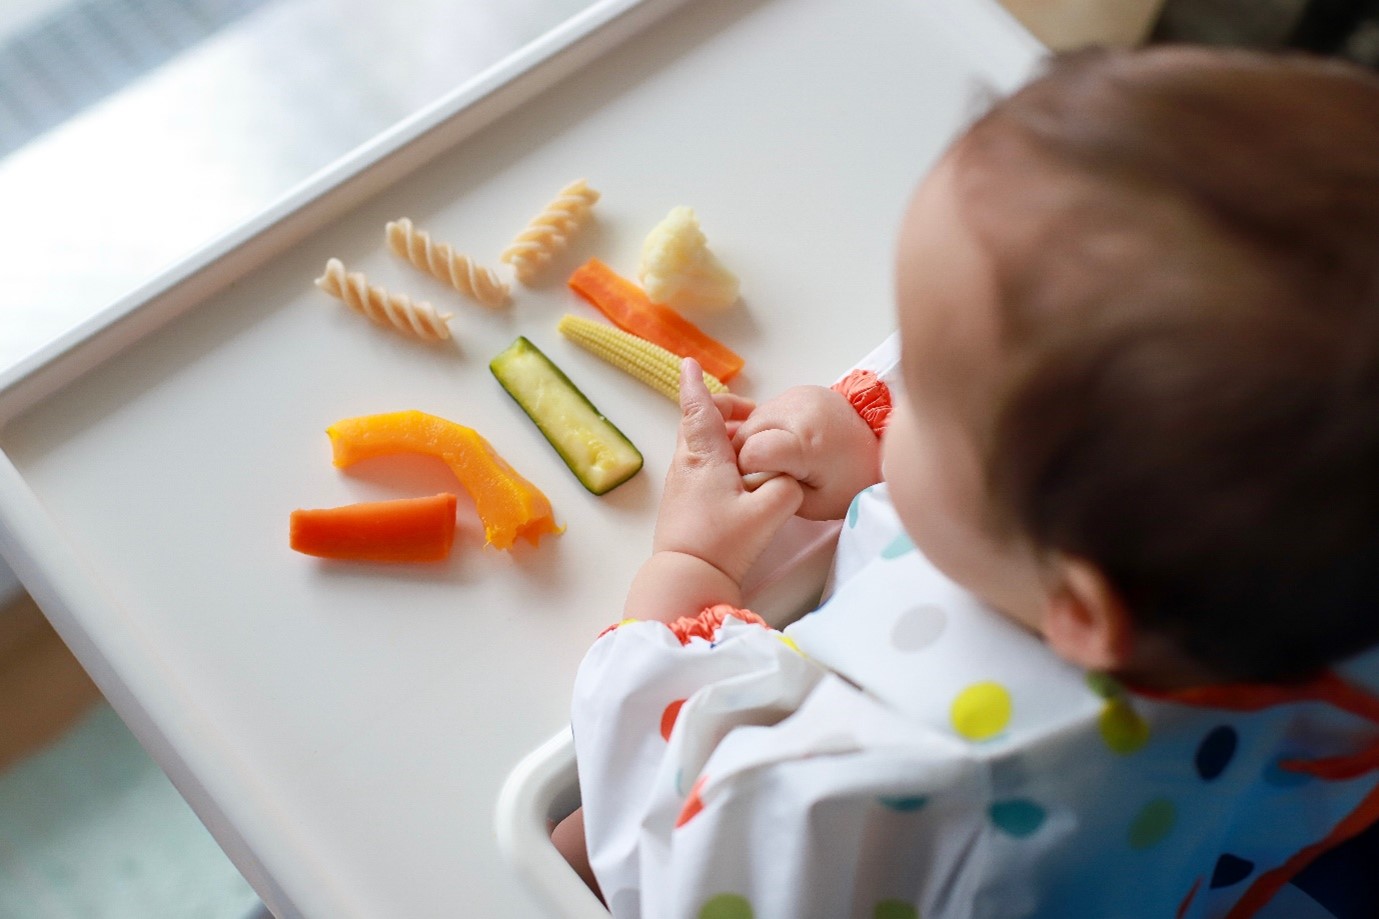 Weaning Essentials Checklist: 9 Things You Need to Wean Your Baby